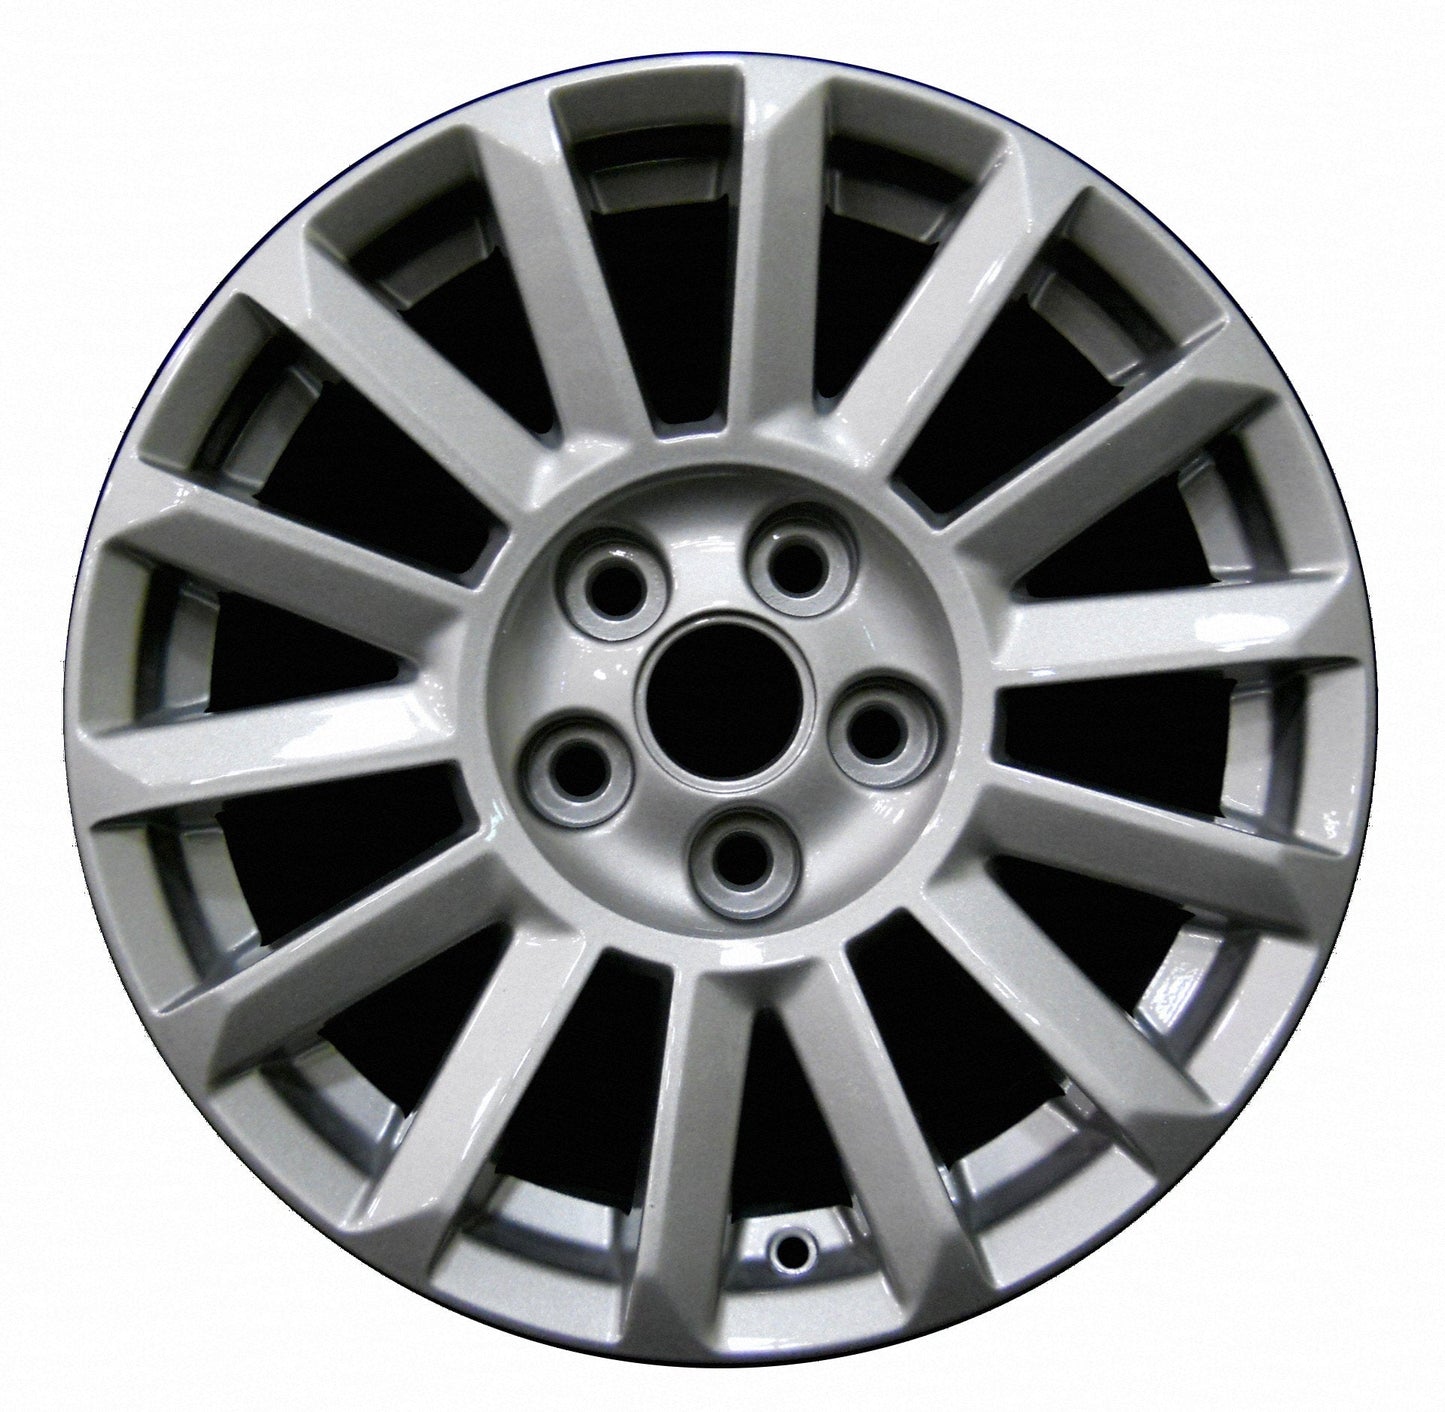 Cadillac CTS  2010, 2011, 2012, 2013 Factory OEM Car Wheel Size 17x8 Alloy WAO.4668.PS09.FF